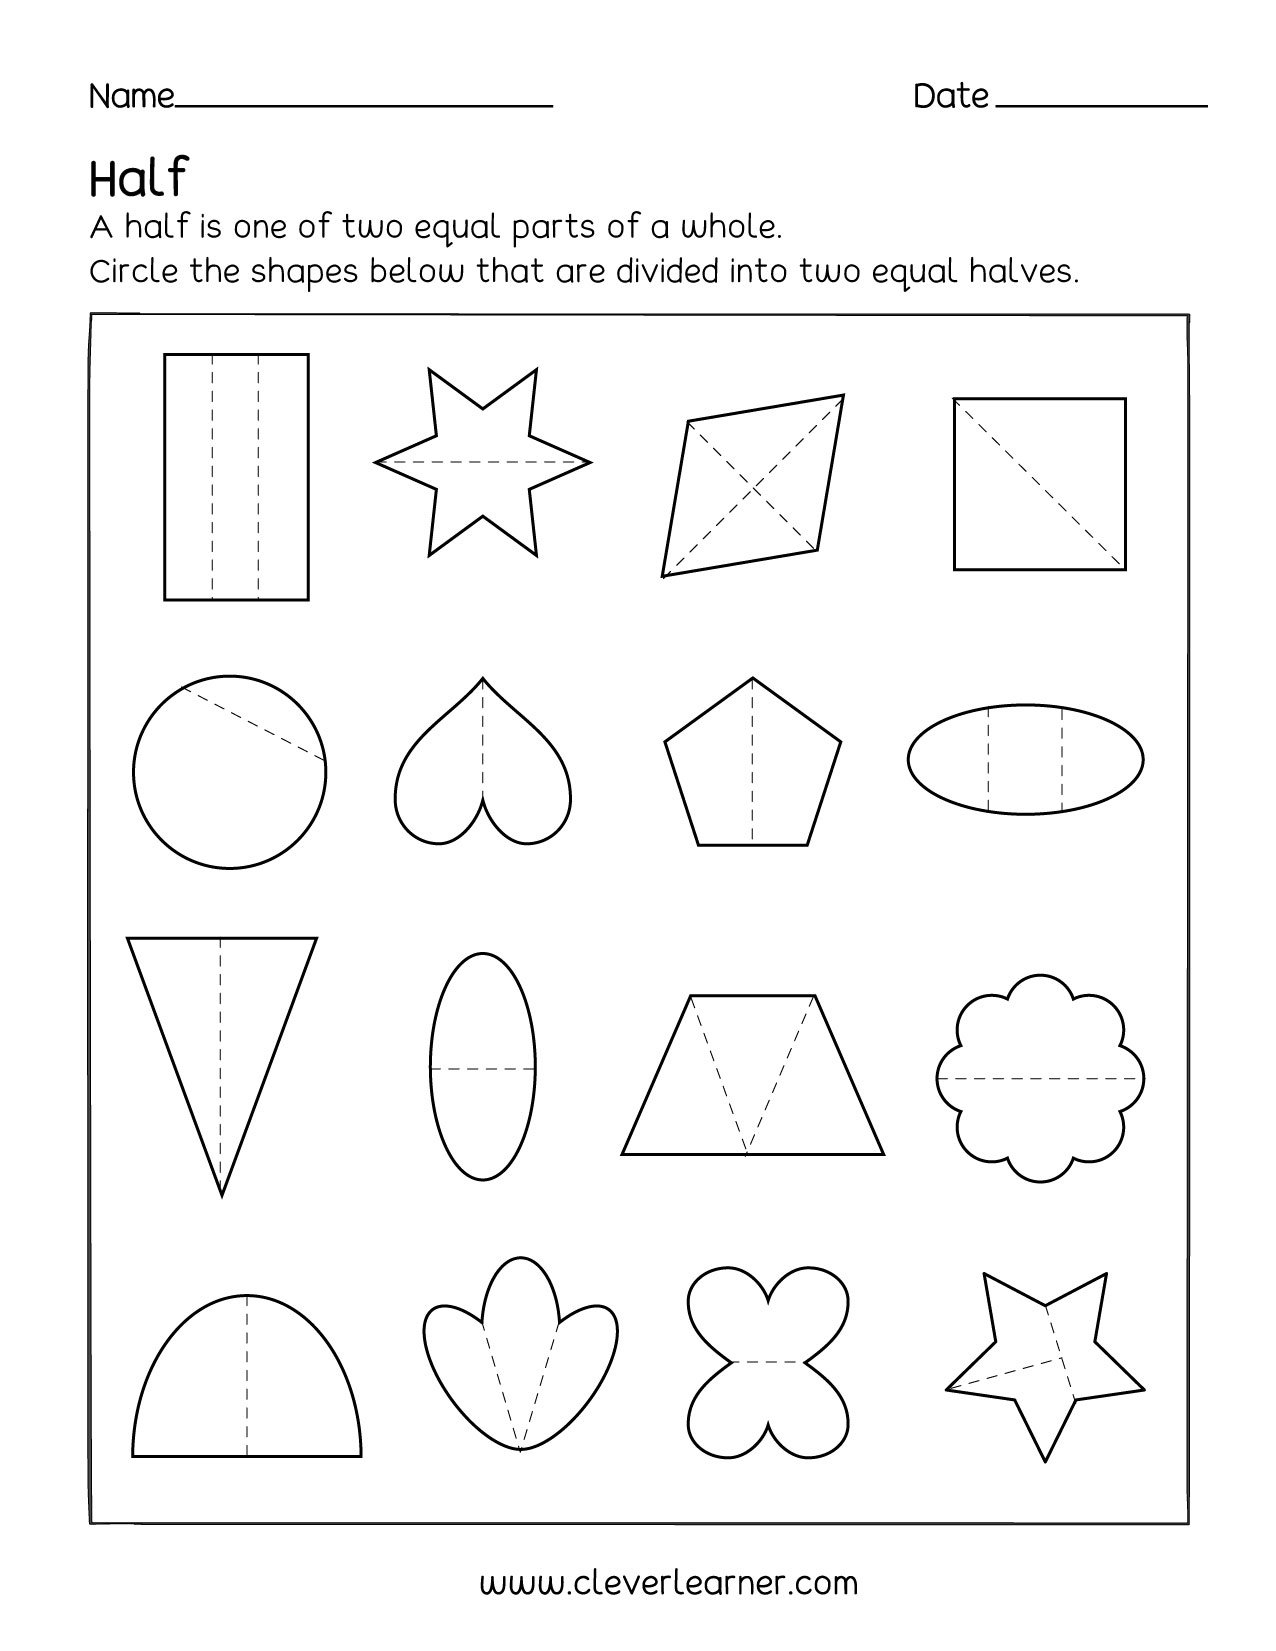 Fun Activity On Fractions Half 12 Worksheets For Children In Dividing Shapes Into Equal Parts Worksheet